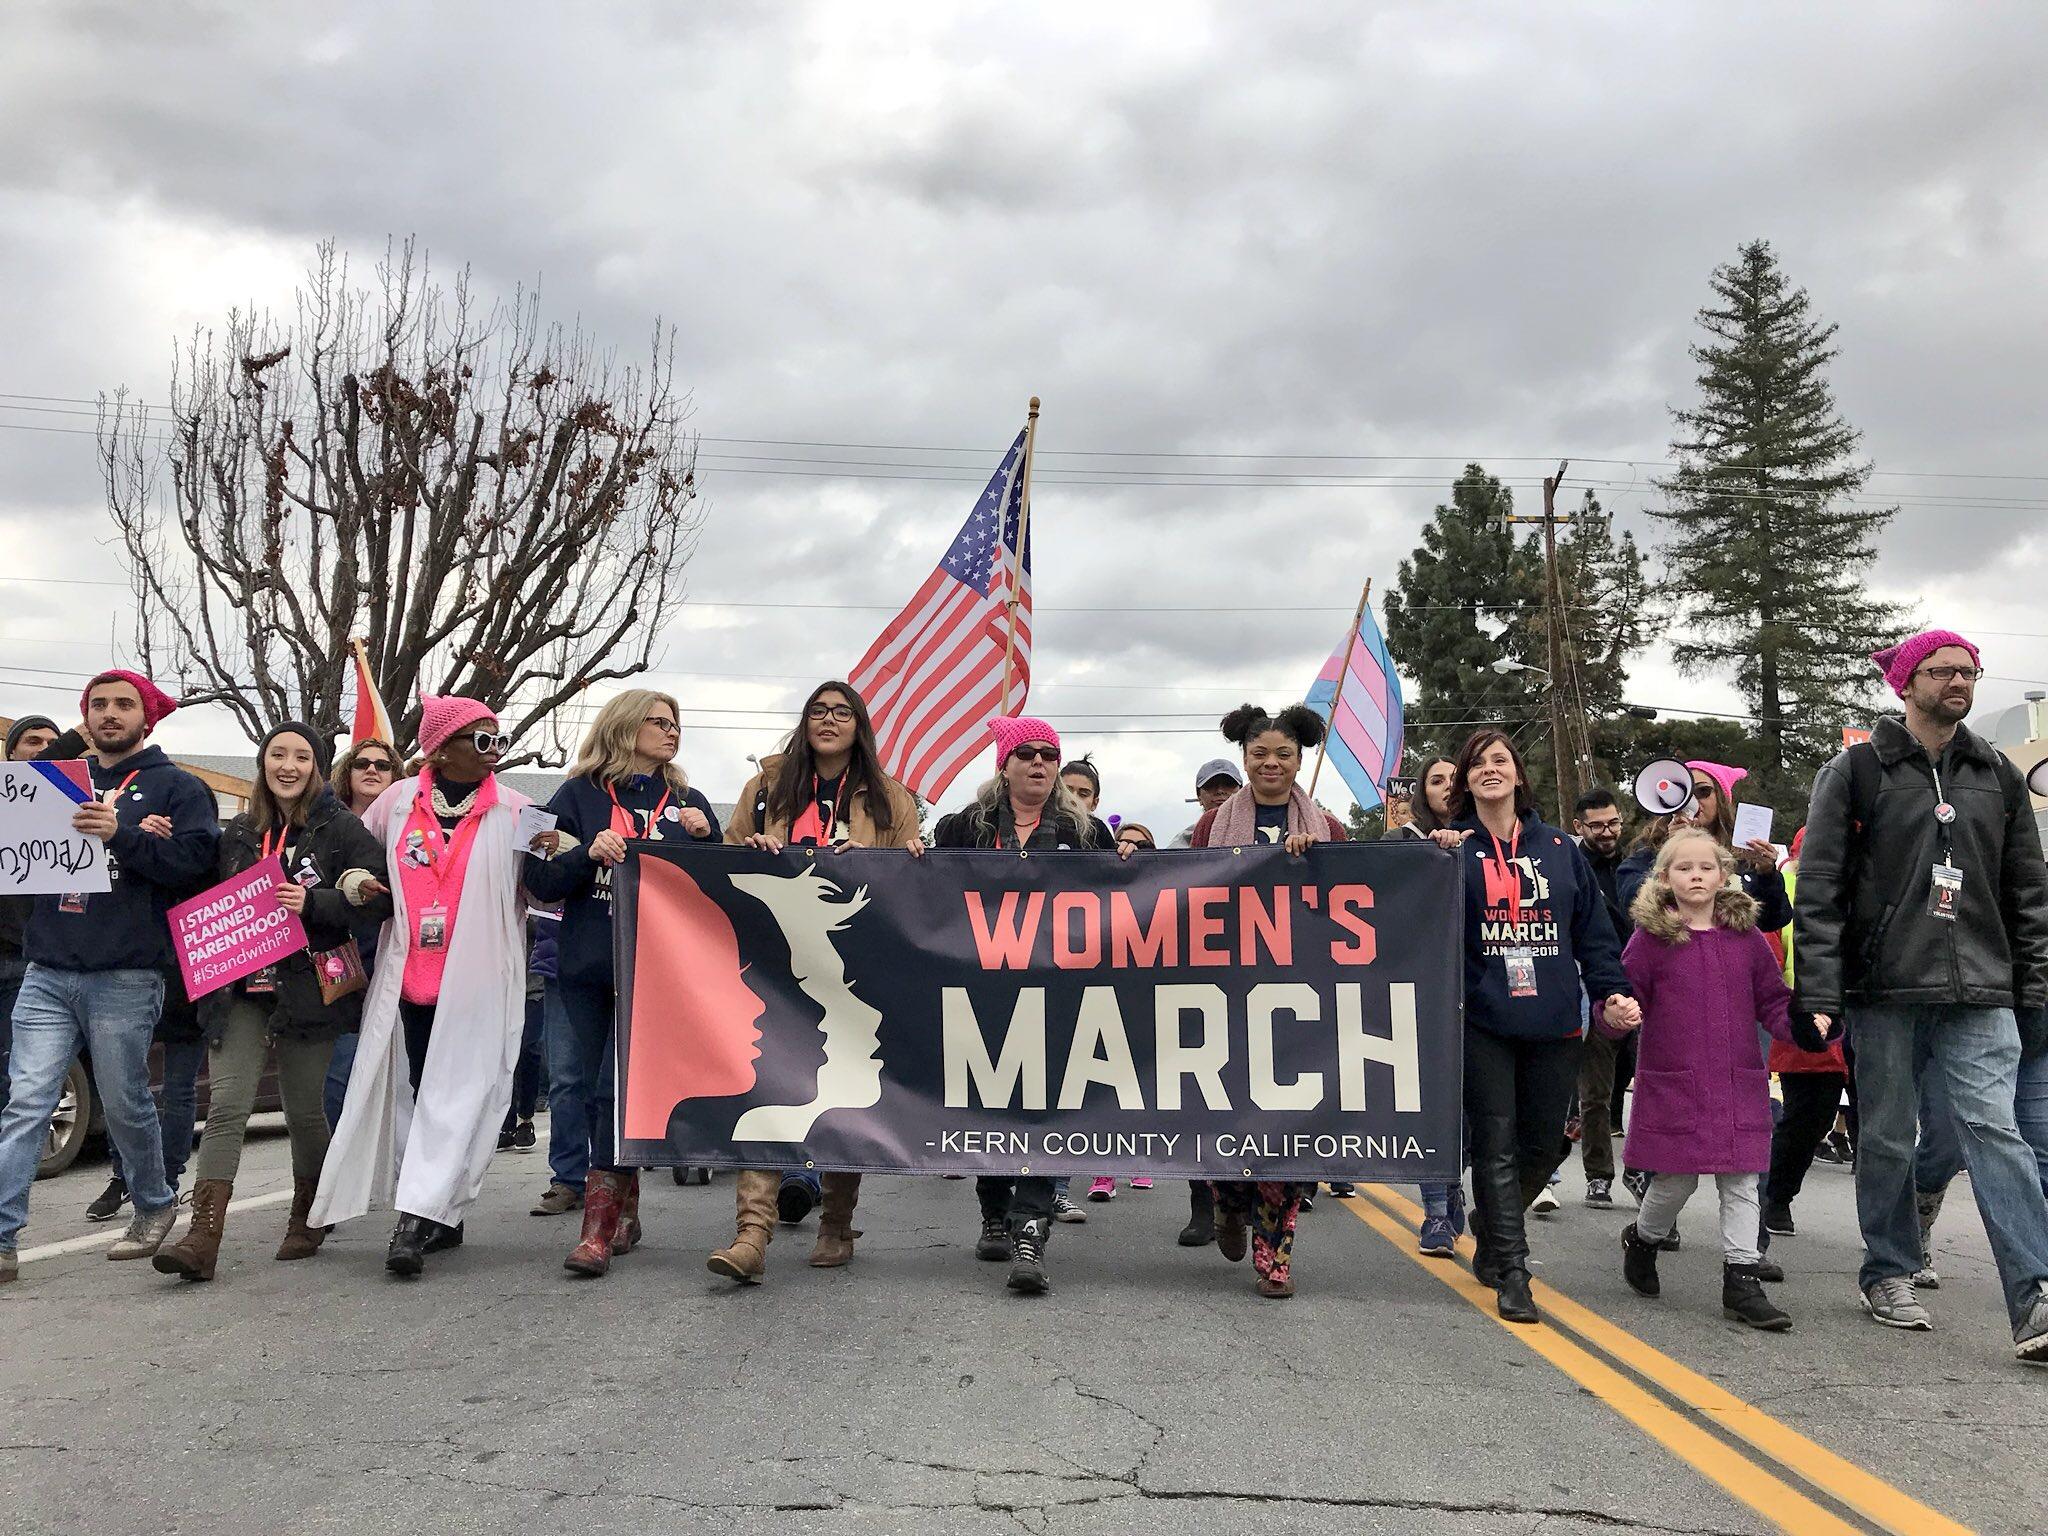 Women's March Makes Its Way To Conservative Kern County | Valley Public Radio2048 x 1536